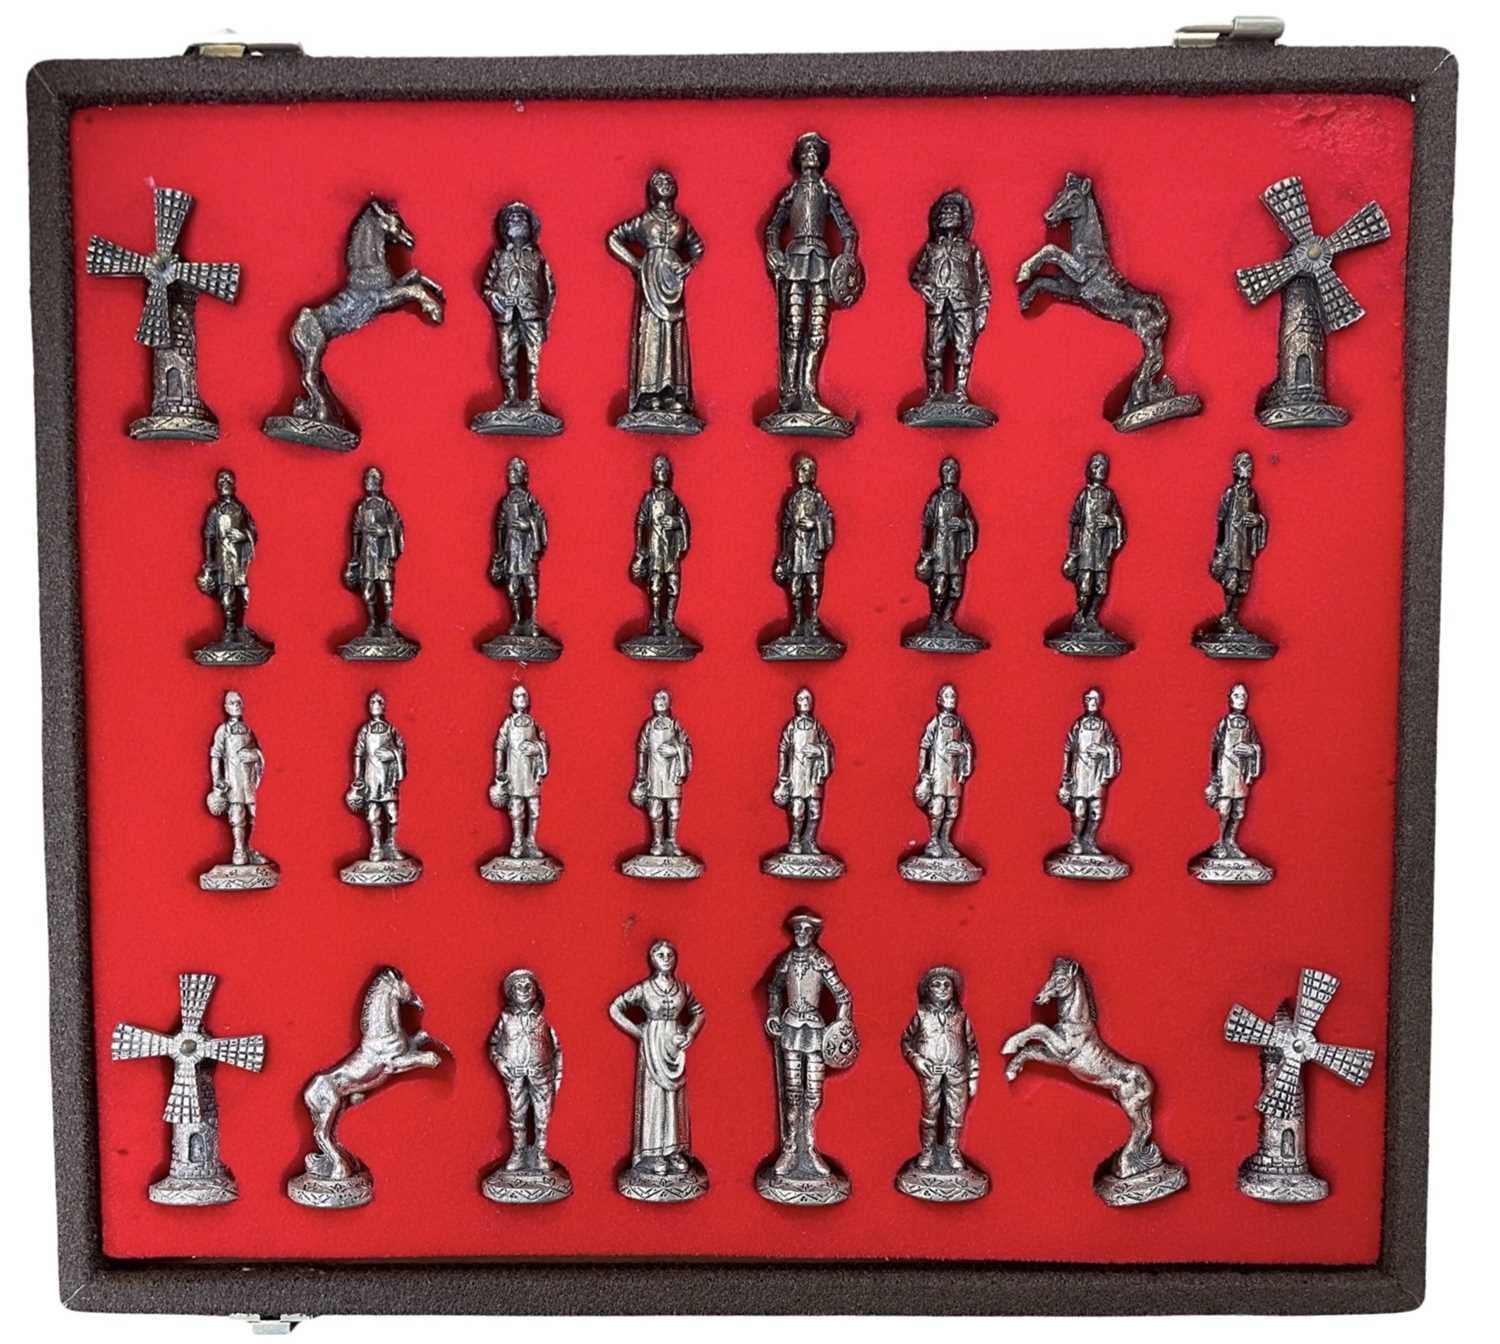 A metal chess set, formed as characters from Don Quixote. Rooks are windmills with rotating blades.